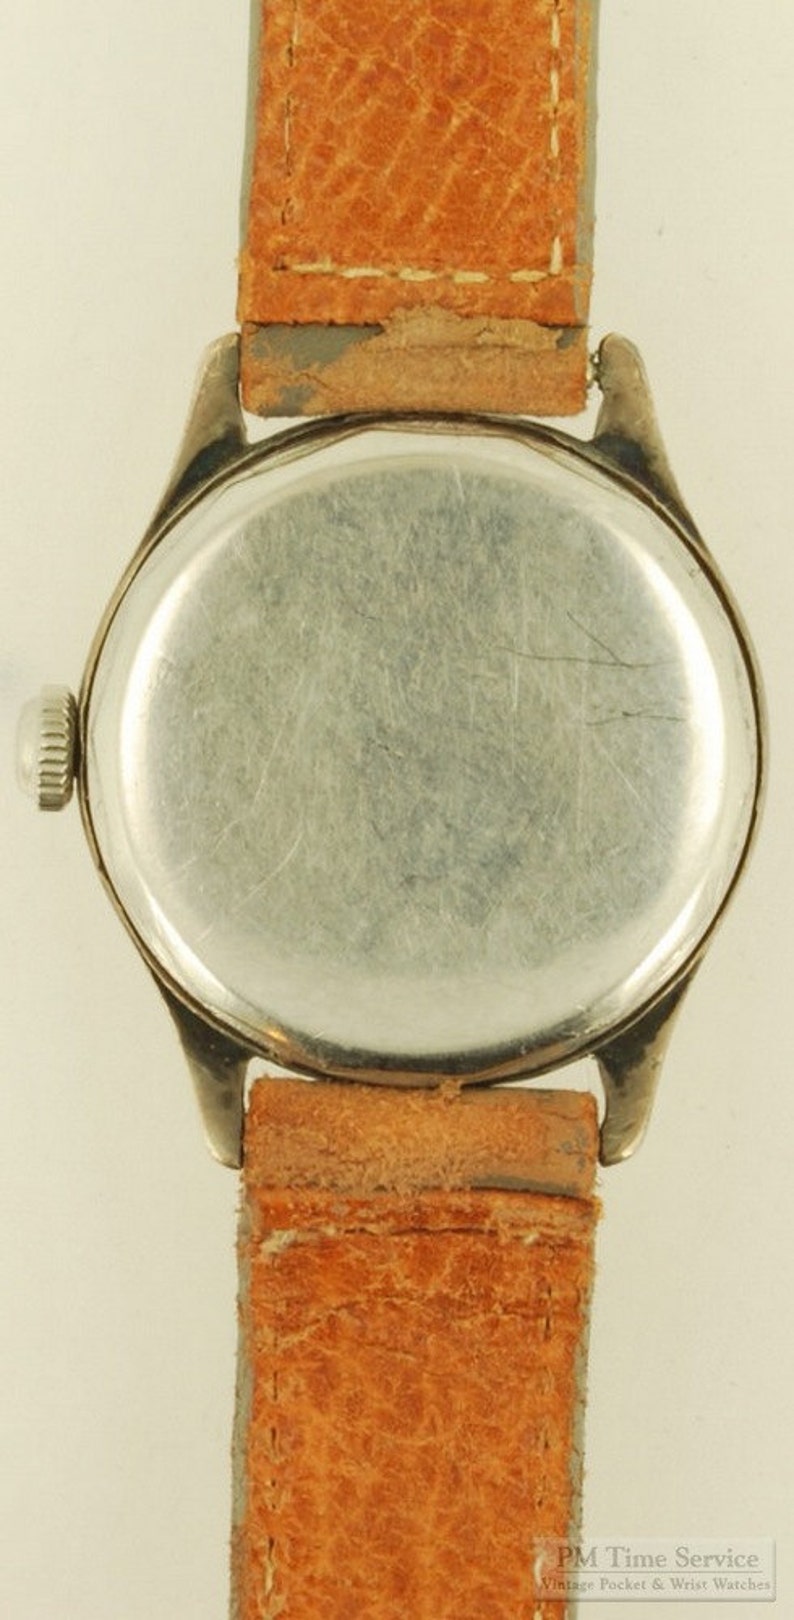 Kingston vintage wrist watch, 15 jewels, solid silver round water resistant case image 4